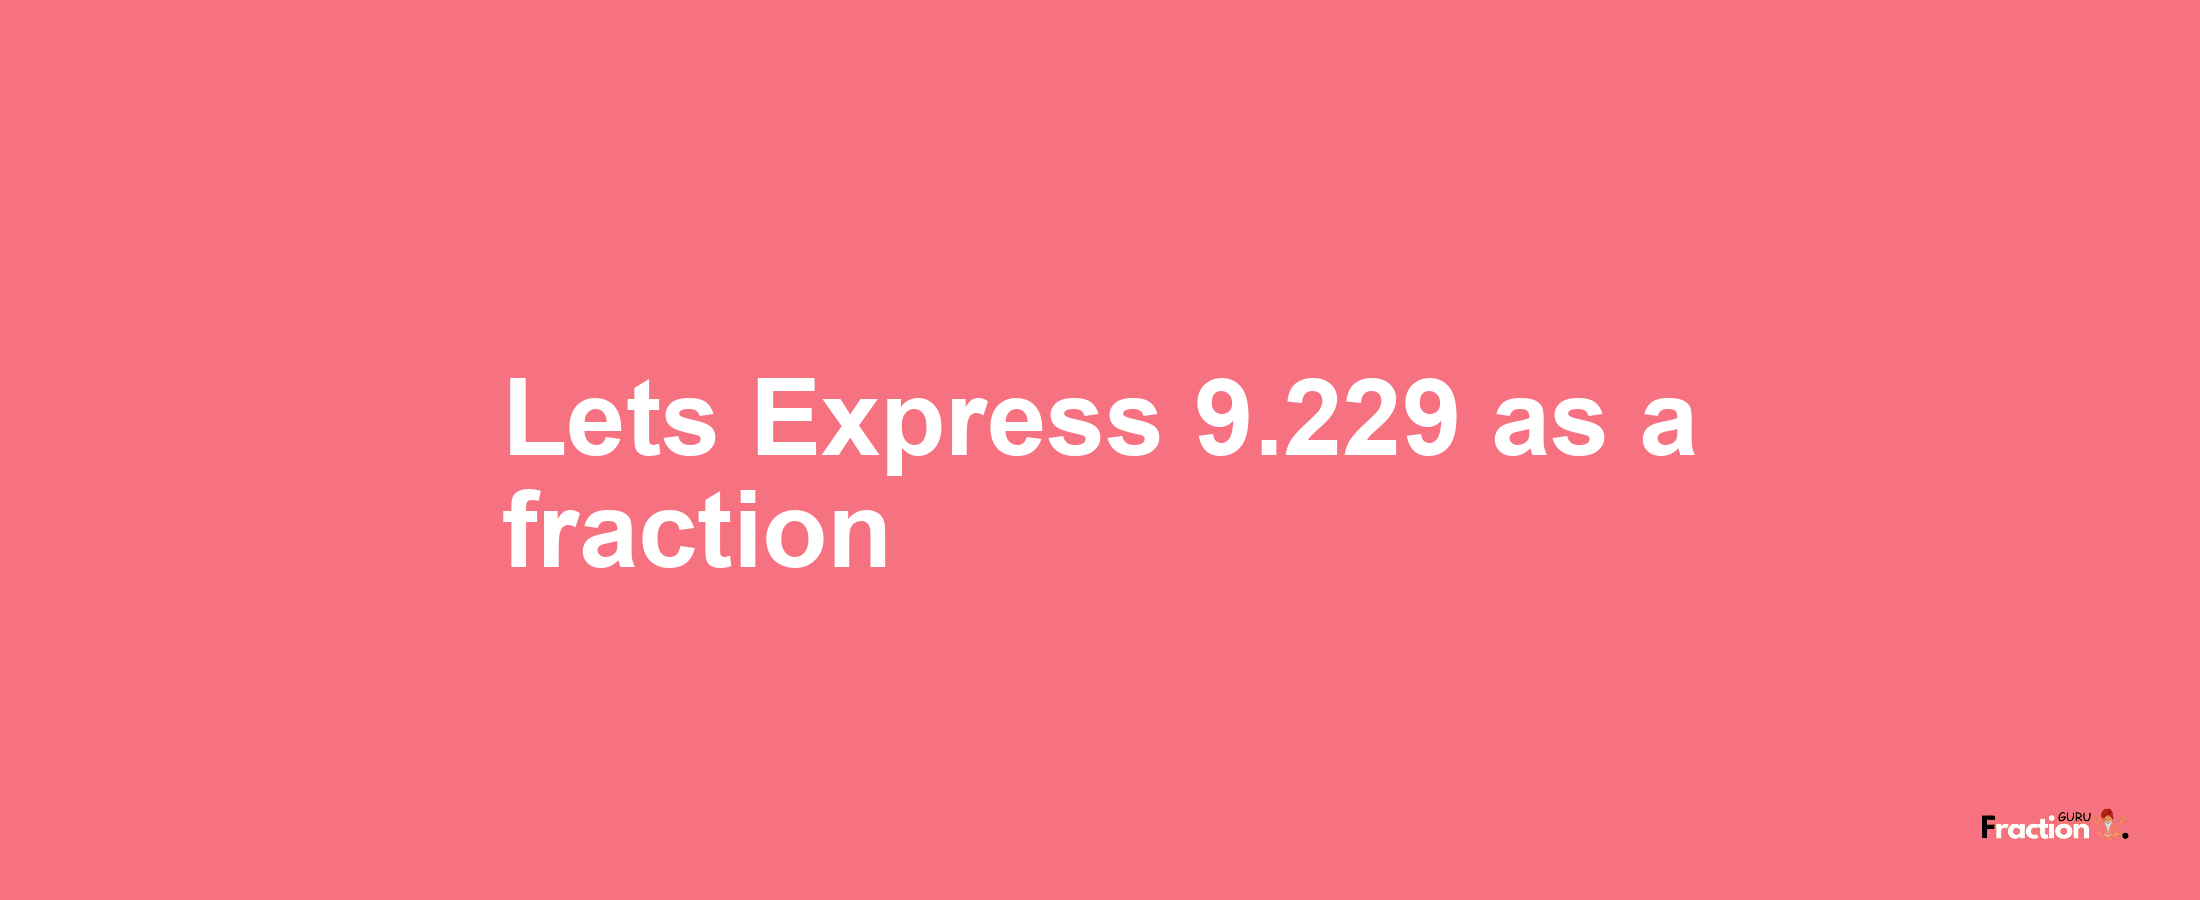 Lets Express 9.229 as afraction